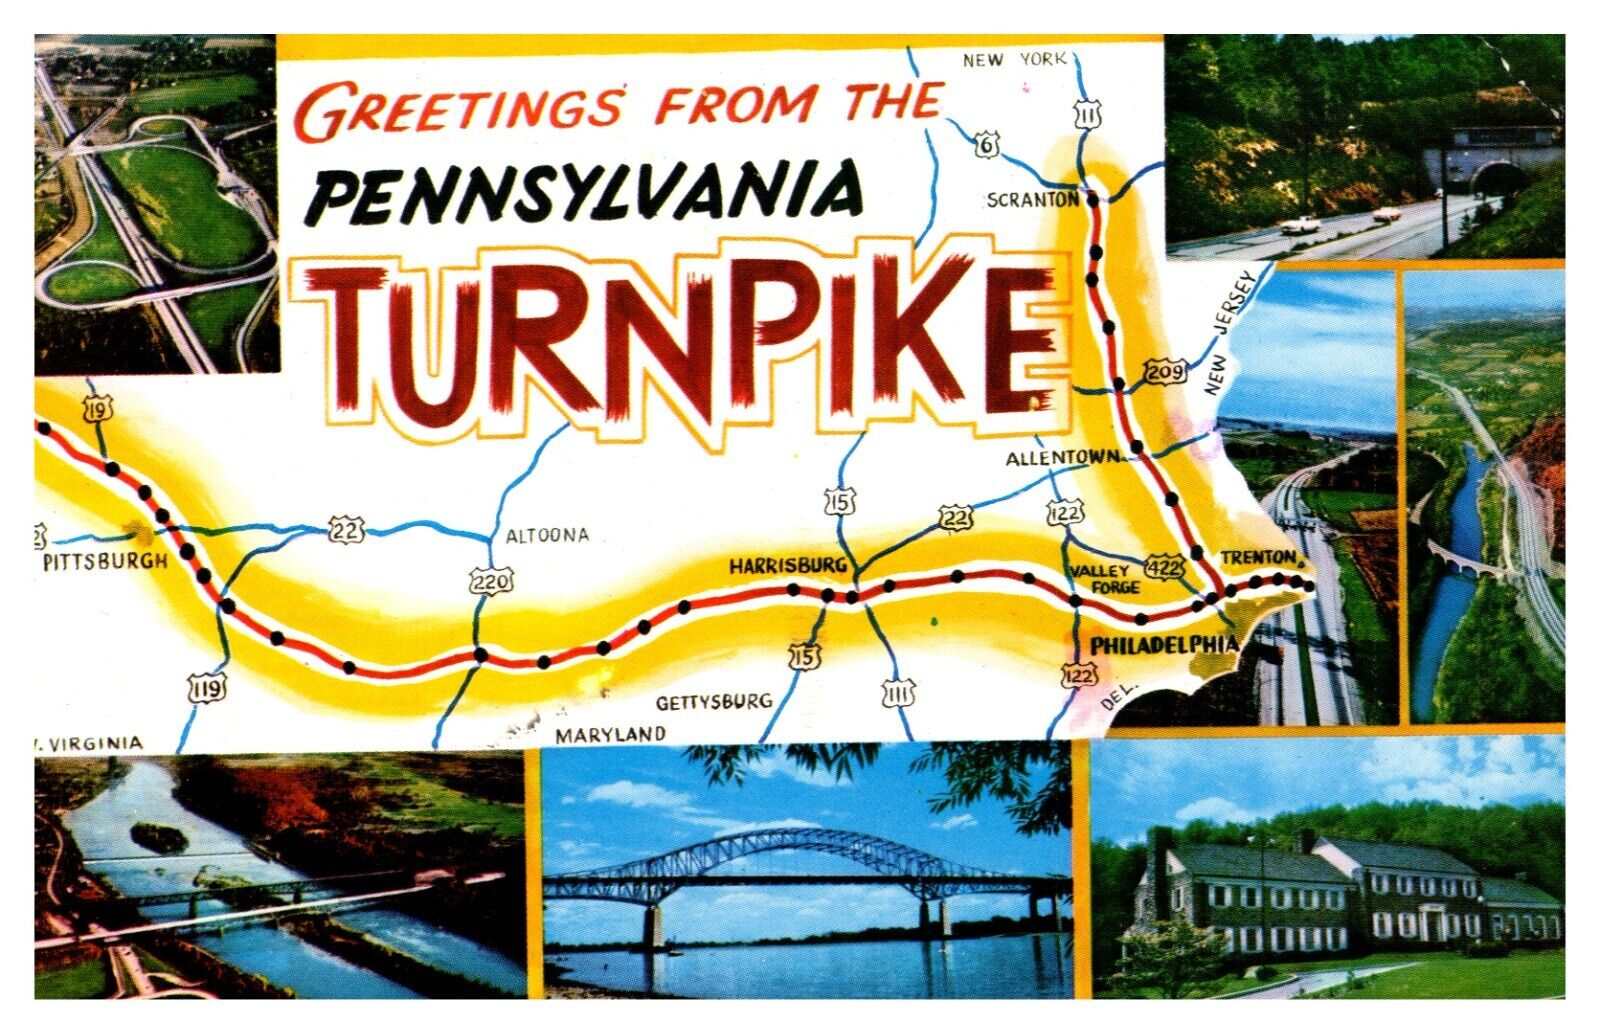 Greetings From  the Pennsylvania Turnpike  Multi-View Postcard   # 563